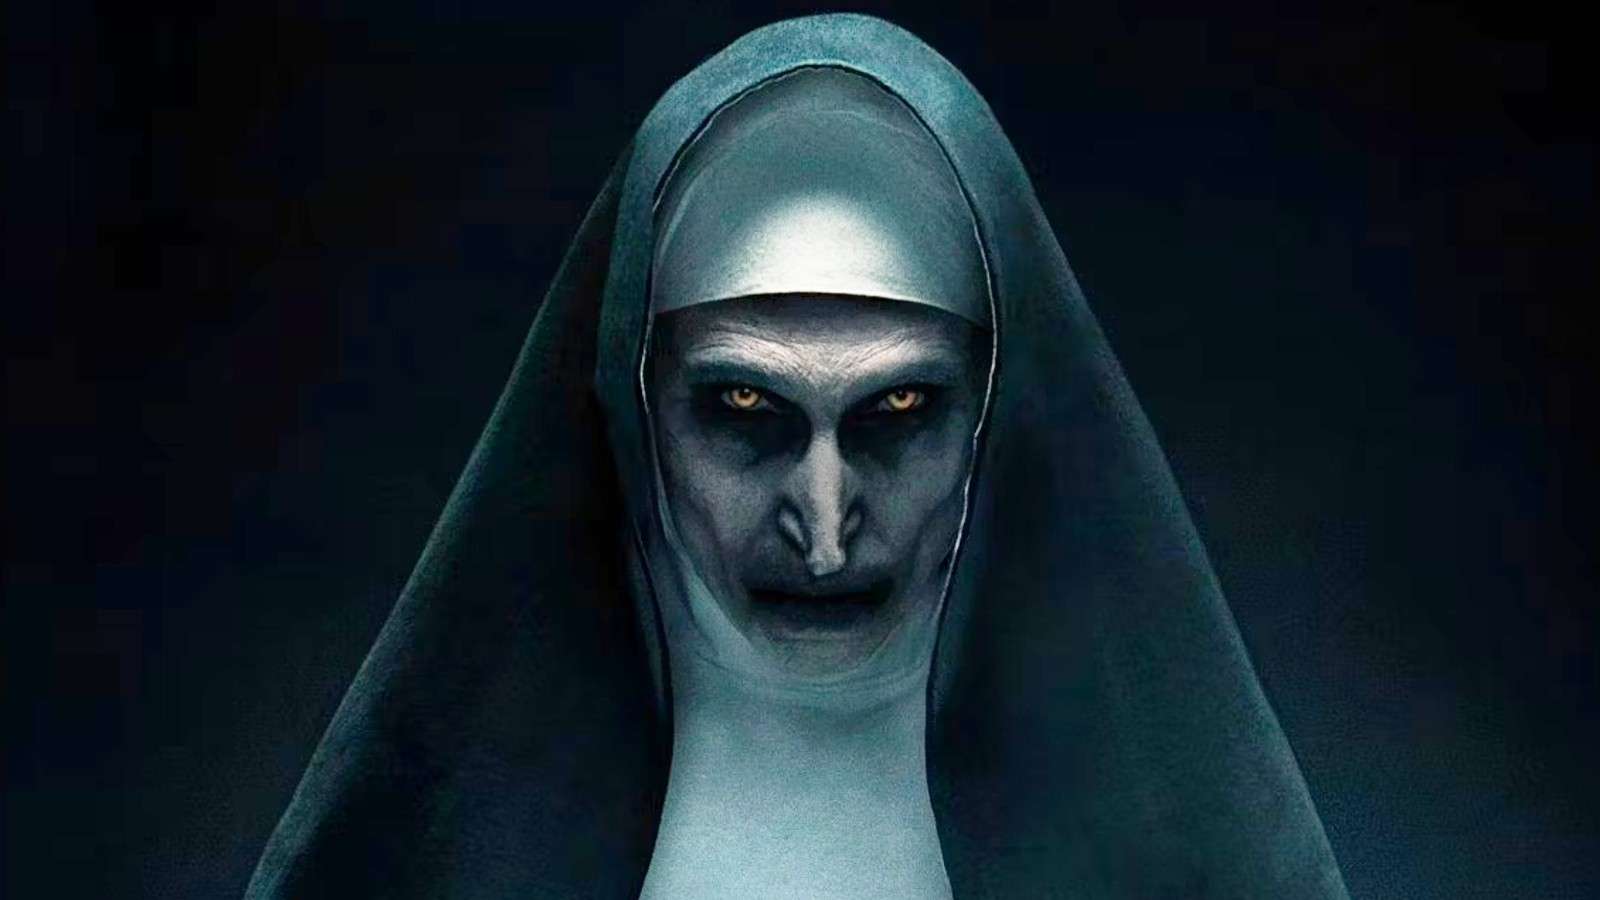 The poster for The Nun 2